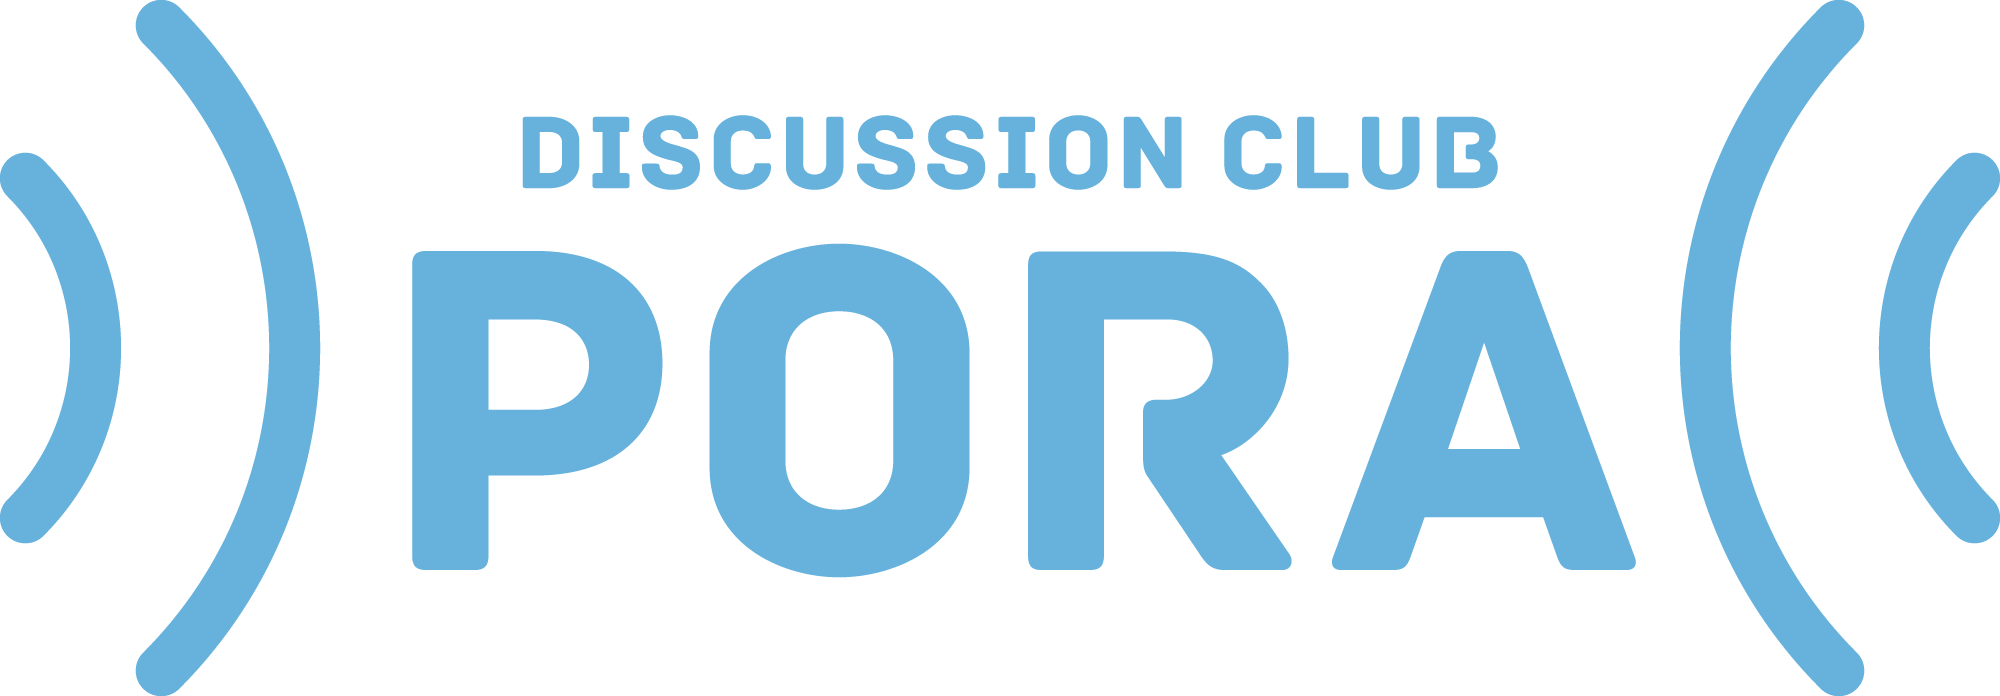 The PORA Discussion Club is a round table bringing together experts, politicians, 
activists, researchers, members of indigenous communities and businesspeople on the subject of sustainable development in the Arctic.